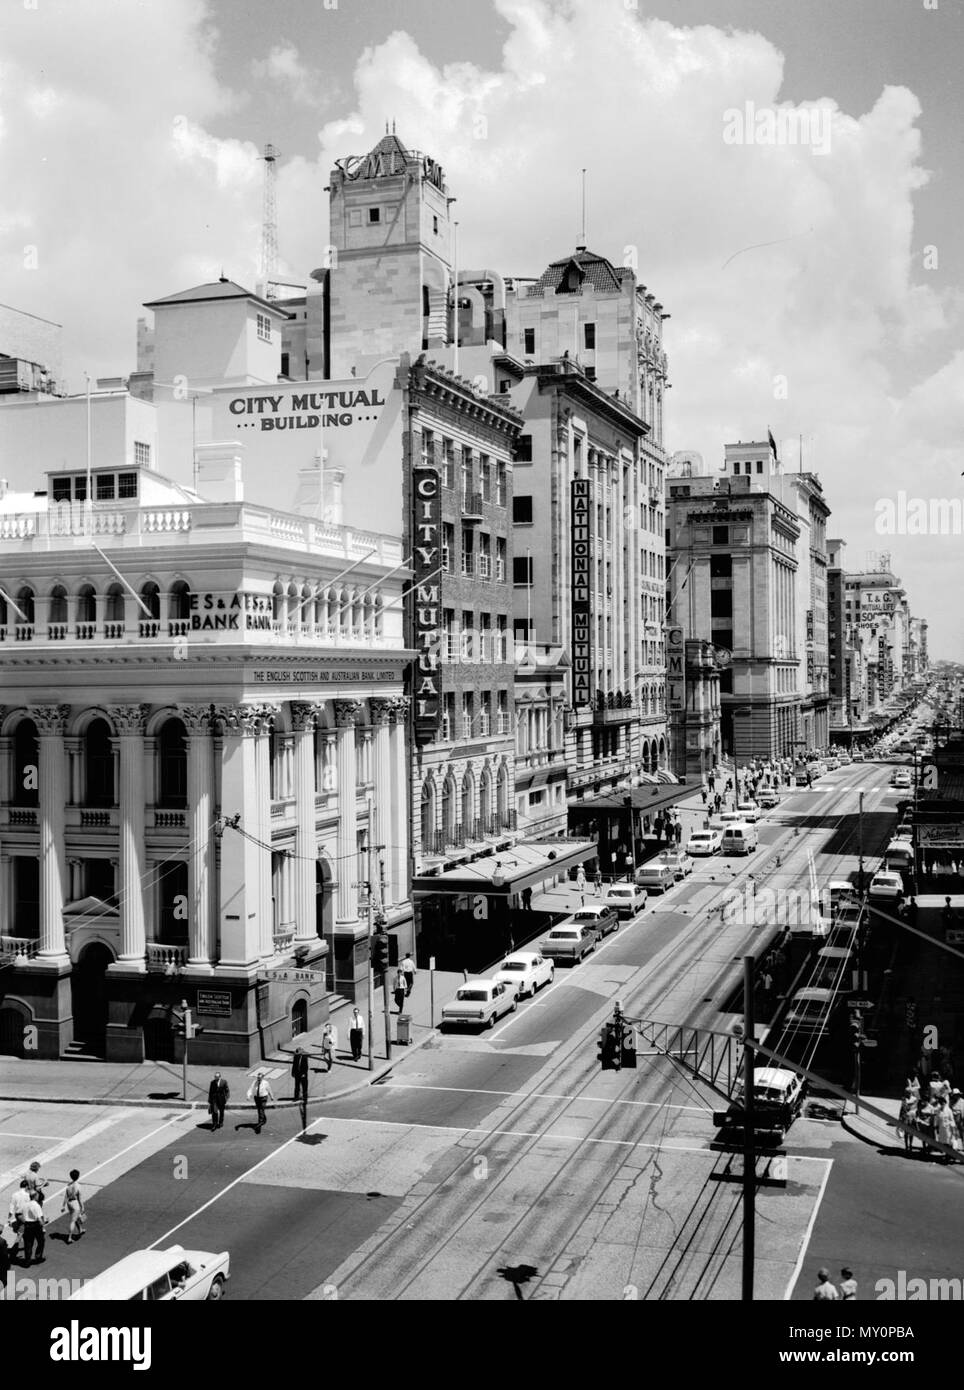 Queen Street, Brisbane, 1965. Queen Street was the hub of Brisbane's financial district, housing the headquarters of many banks and insurance companies. Visible in this photograph are the now heritage listed National Mutual Life Building, Newspaper House and MacArthur Chambers. Stock Photo